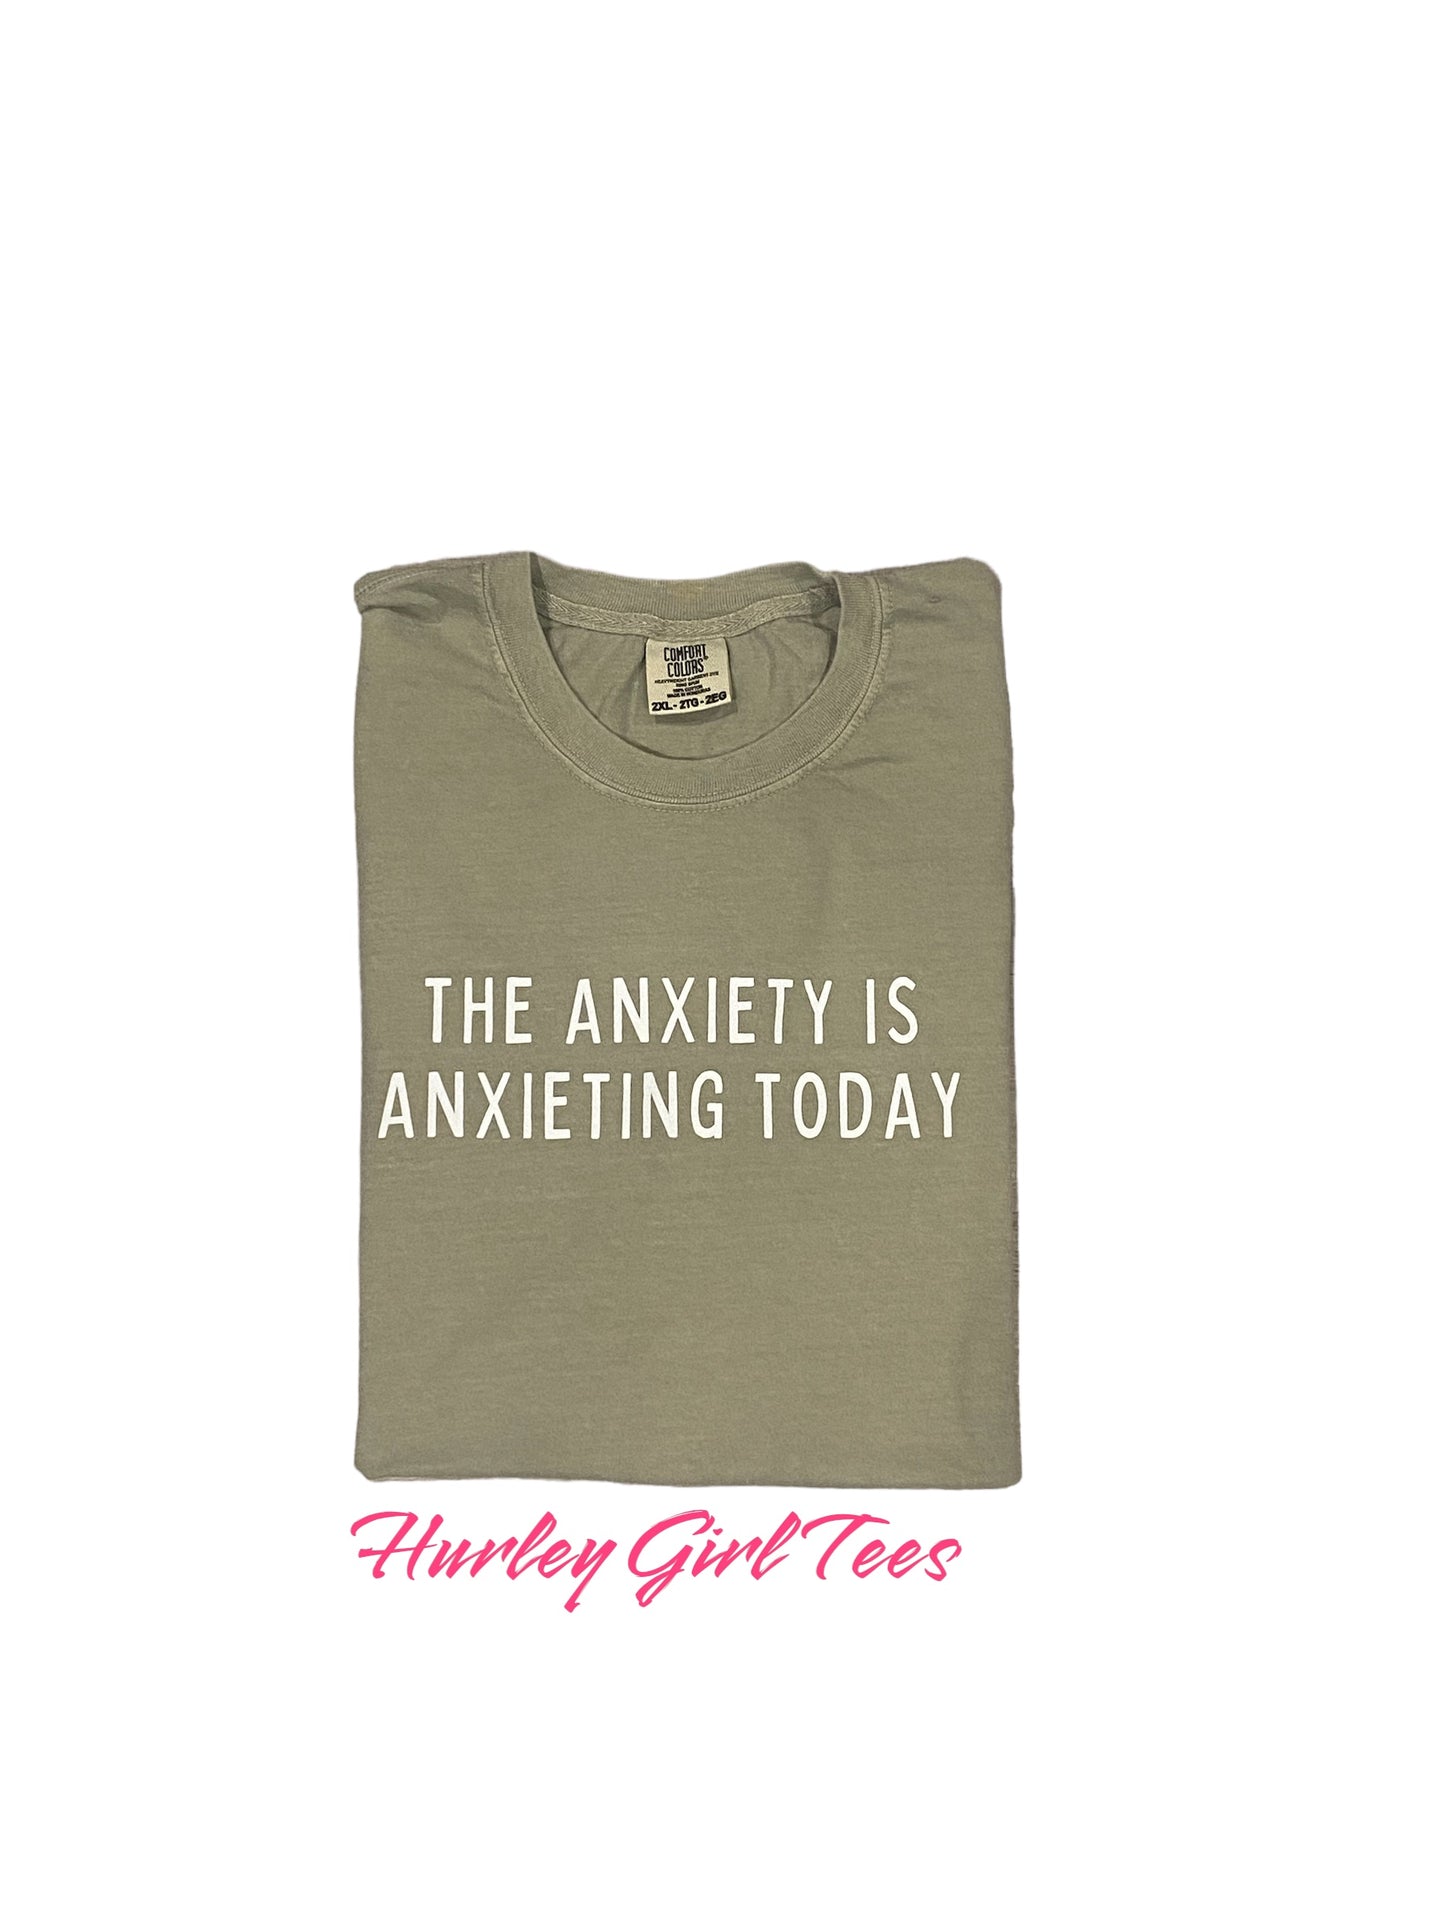 The anxiety is anxieting today T-shirt